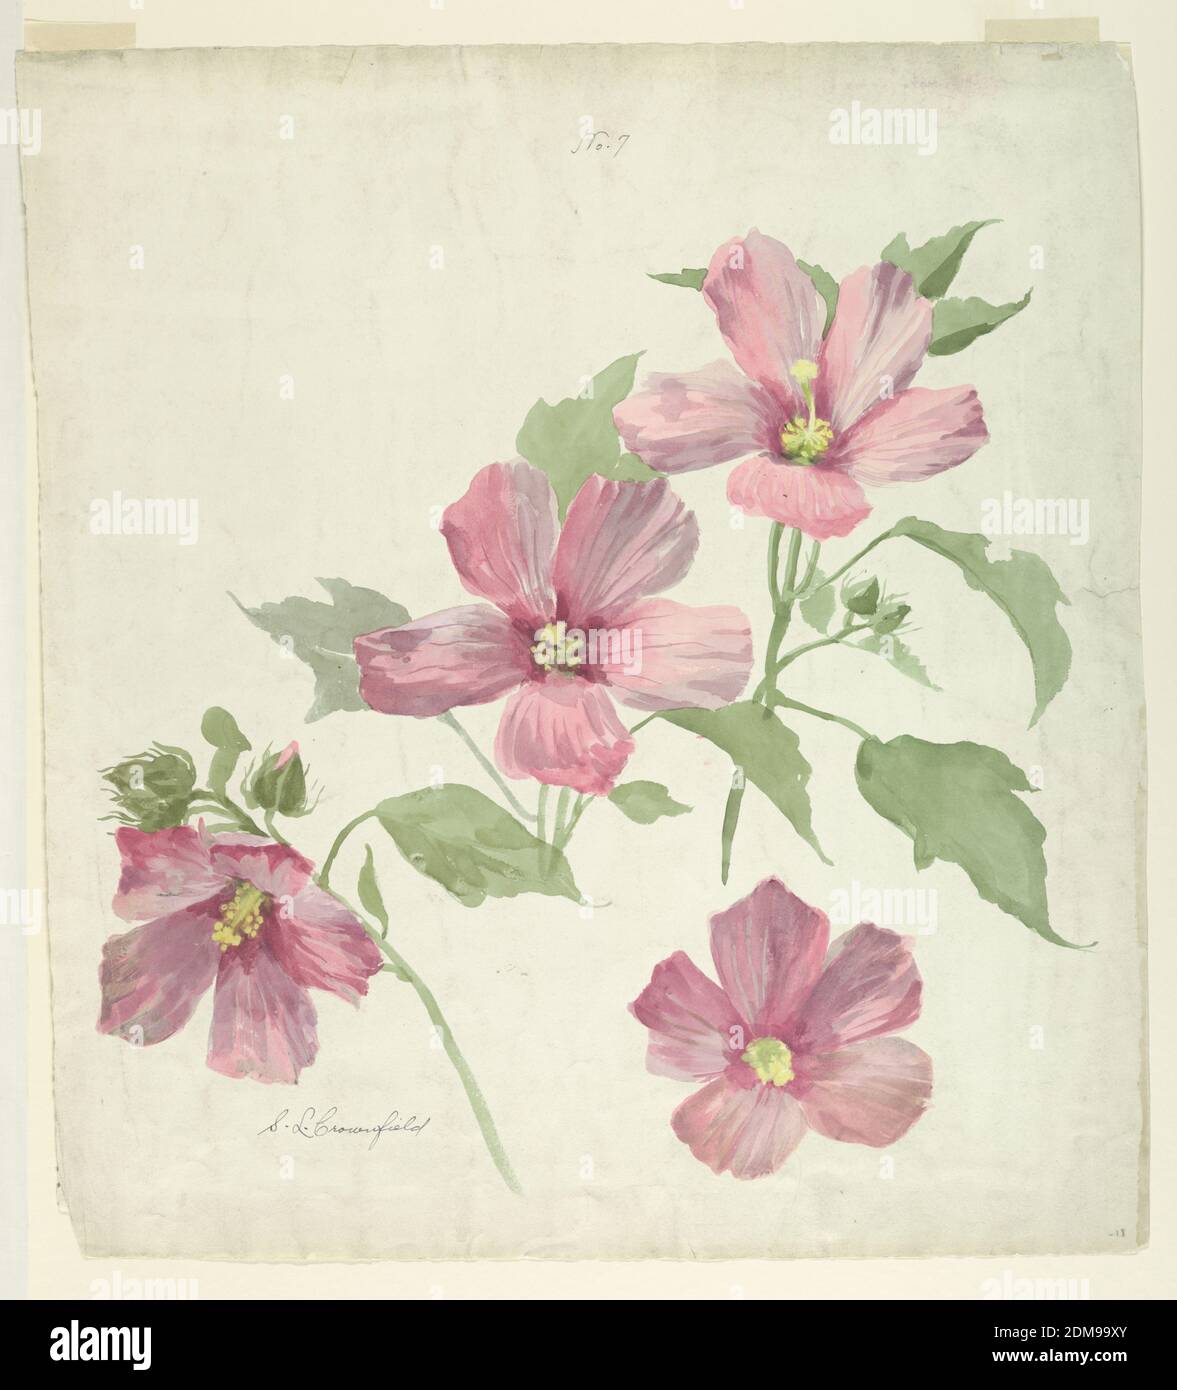 Study of Mallow, Sophia L. Crownfield, (American, 1862–1929), Brush and watercolor on white paper, Vertical sheet depicting sprays of pink mallow ascending toward the upper right corner., USA, early 20th century, nature studies, Drawing Stock Photo